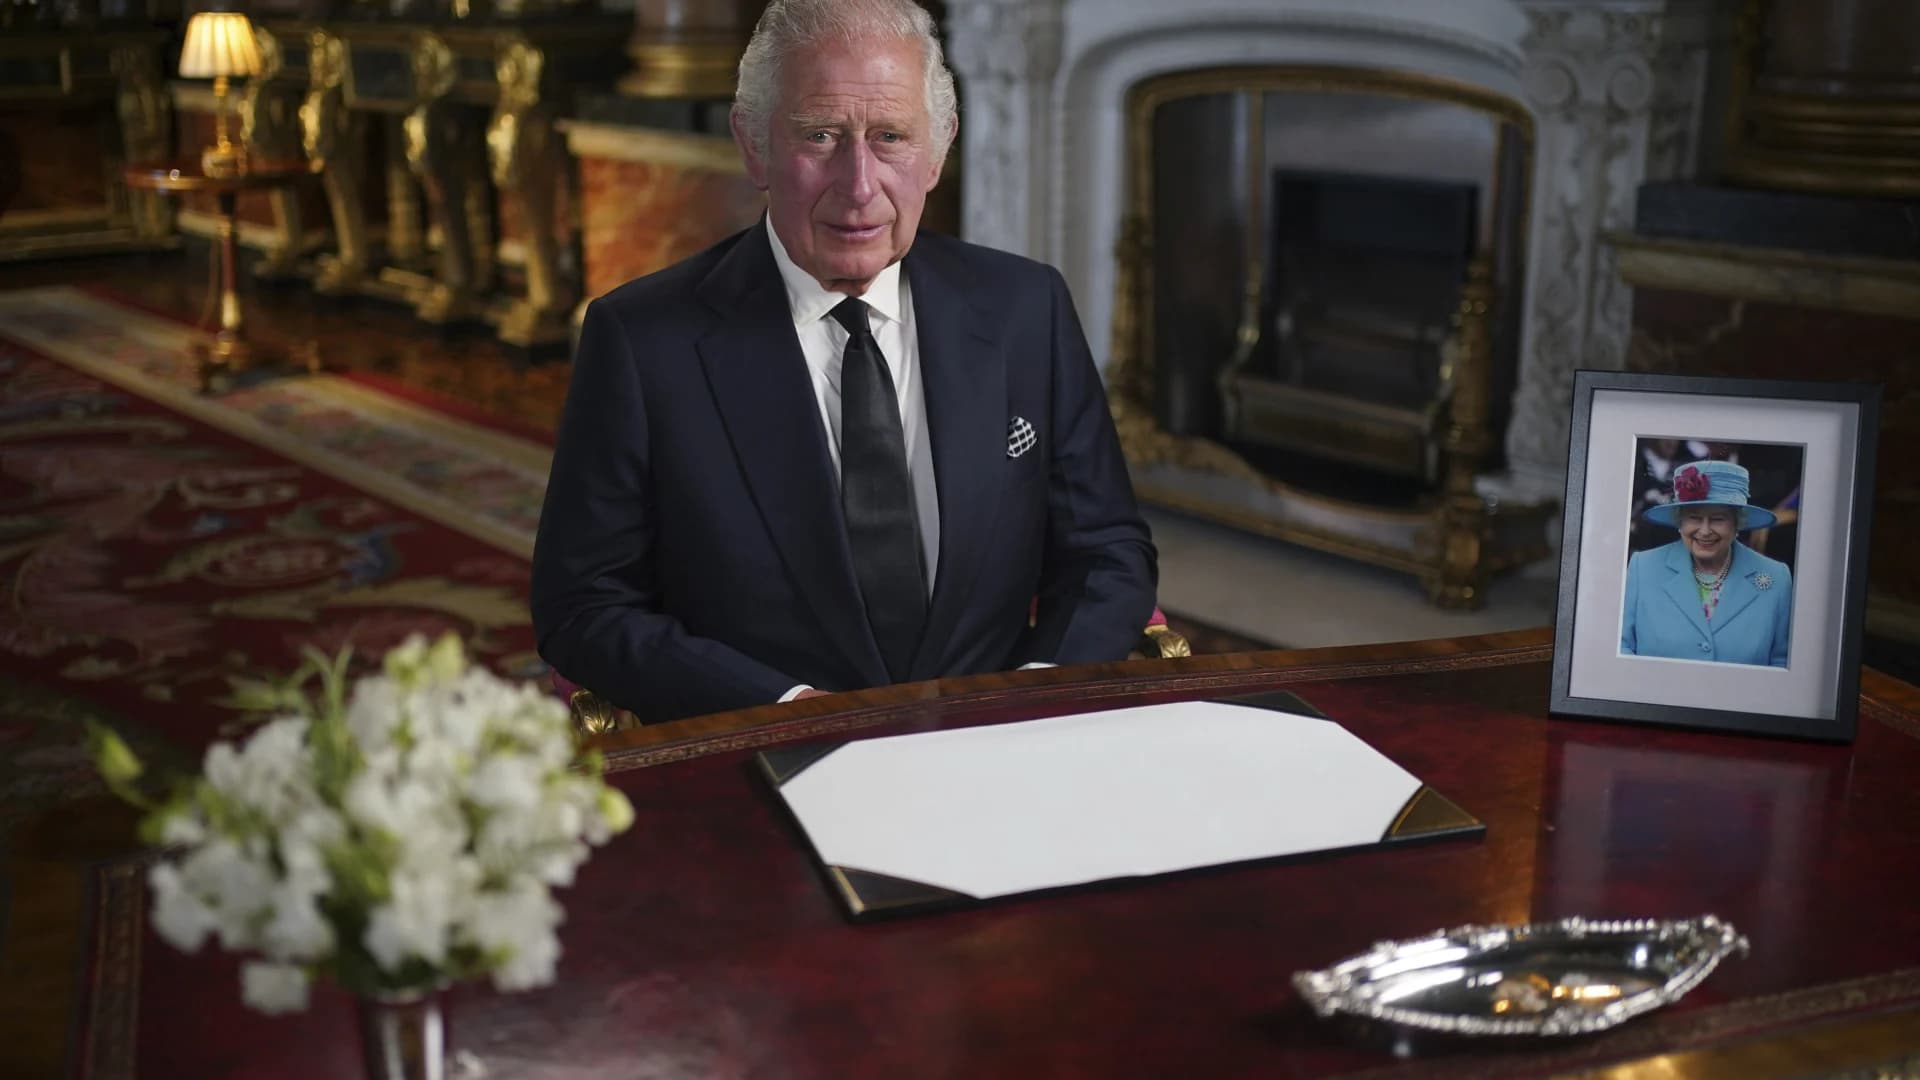 King Charles III, in first address, vows 'lifelong service'